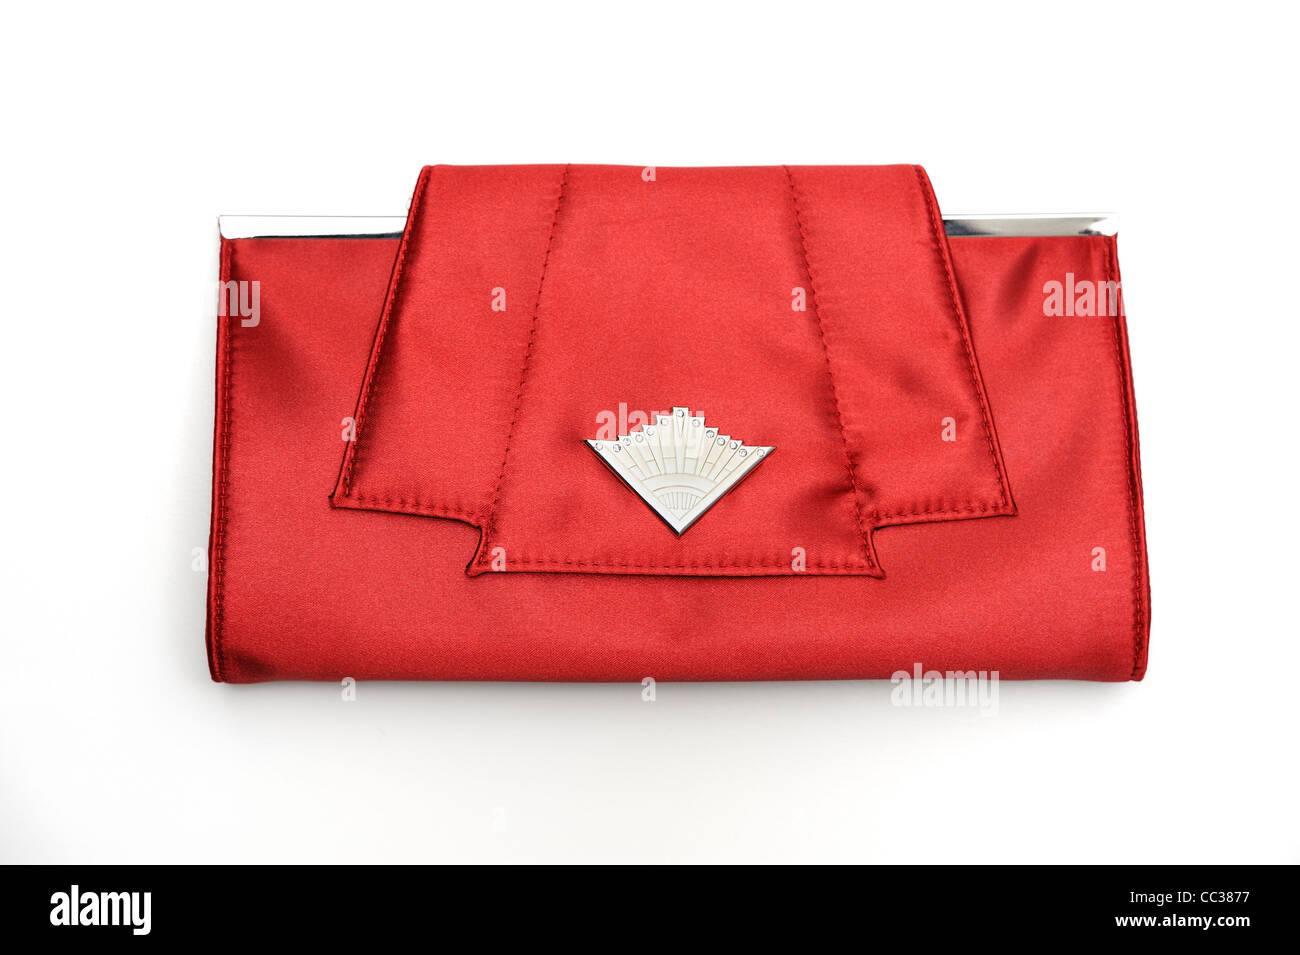 GHD red clutch bag england uk Stock Photo